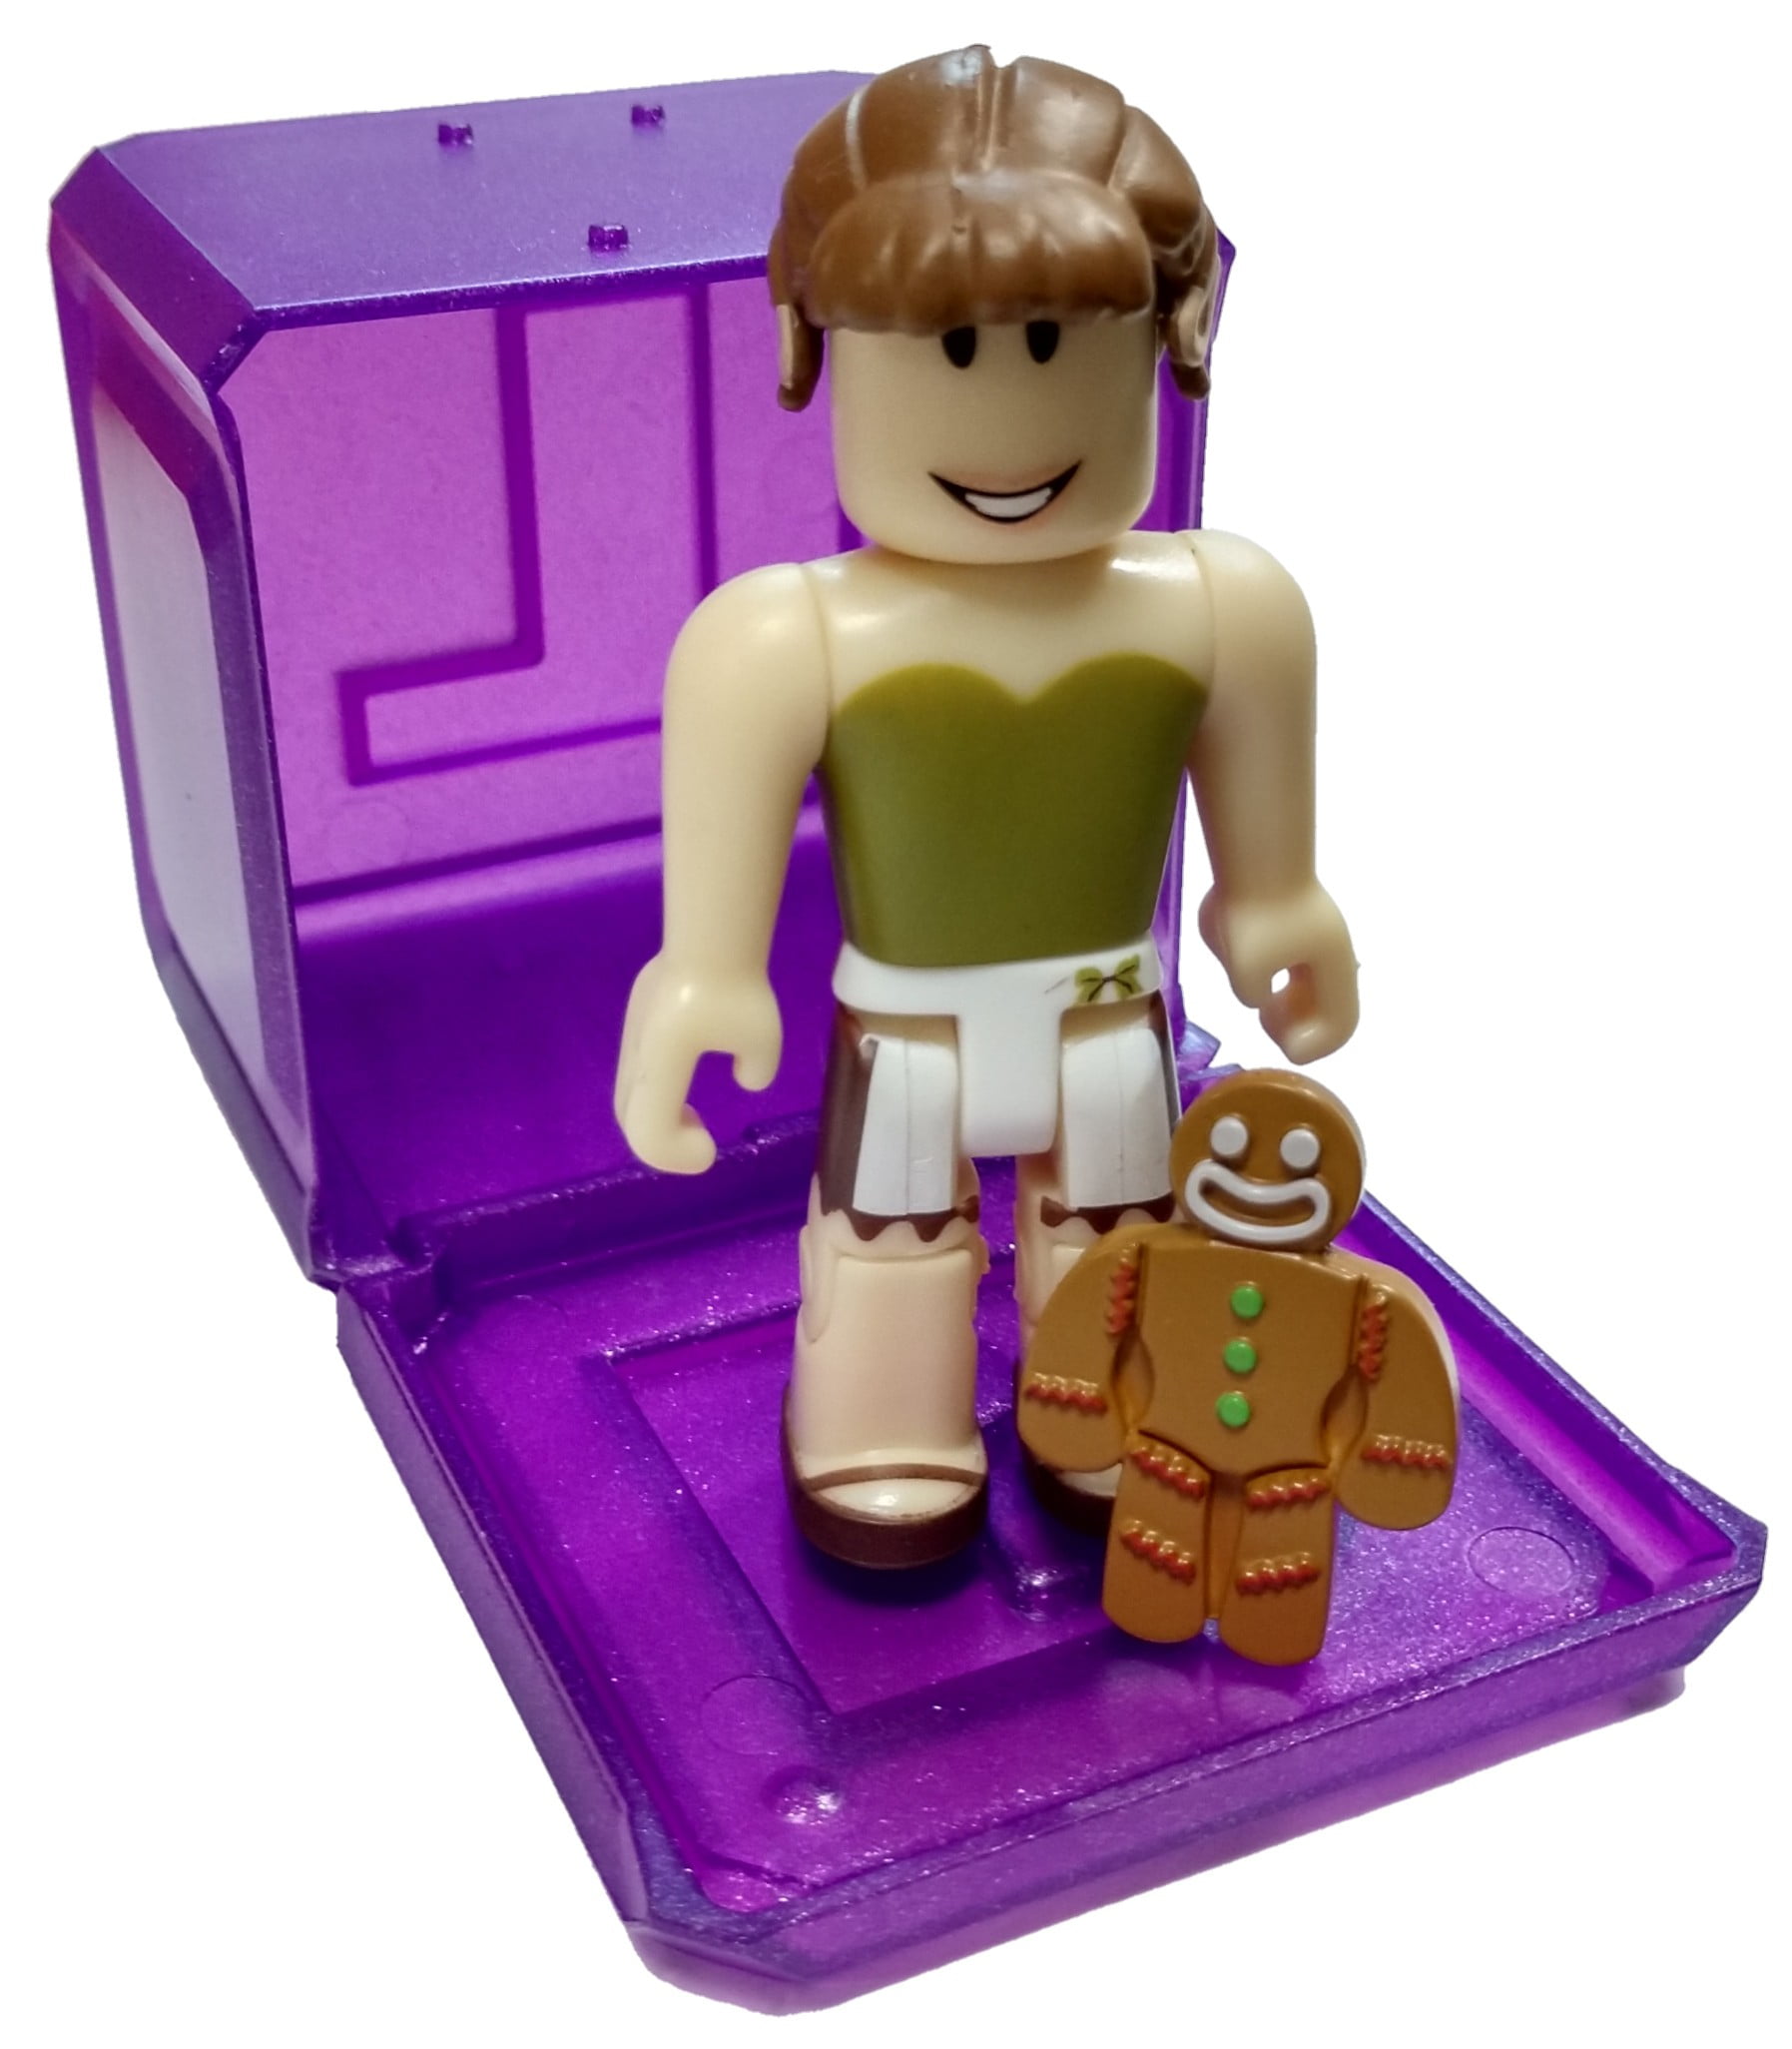 Roblox Celebrity Collection Series 3 Neverland Lagoon Star Fresh Mini Figure With Cube And Online Code No Packaging Walmart Com Walmart Com - roblox celebrity collection series 3 neverland lagoon star fresh 3